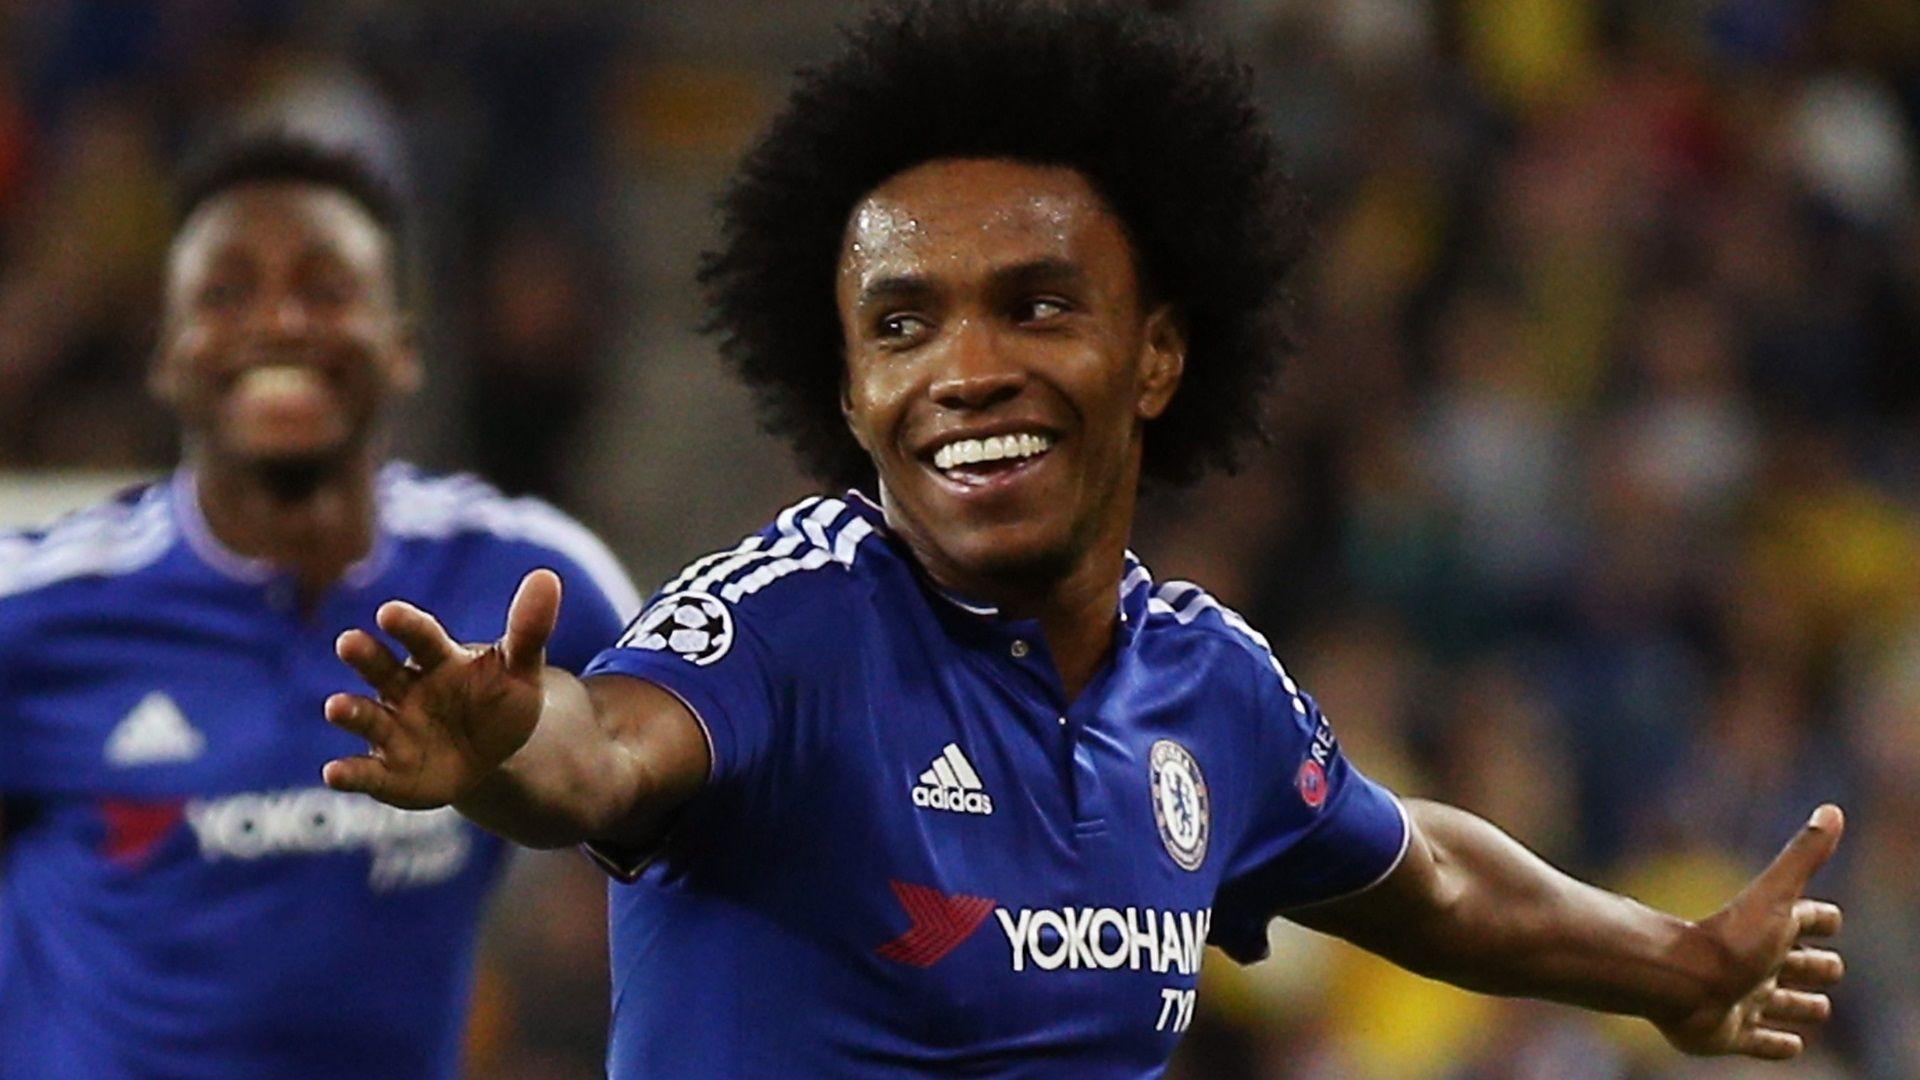 Chelsea Player Willian Happy Wallpaper: Players, Teams, Leagues